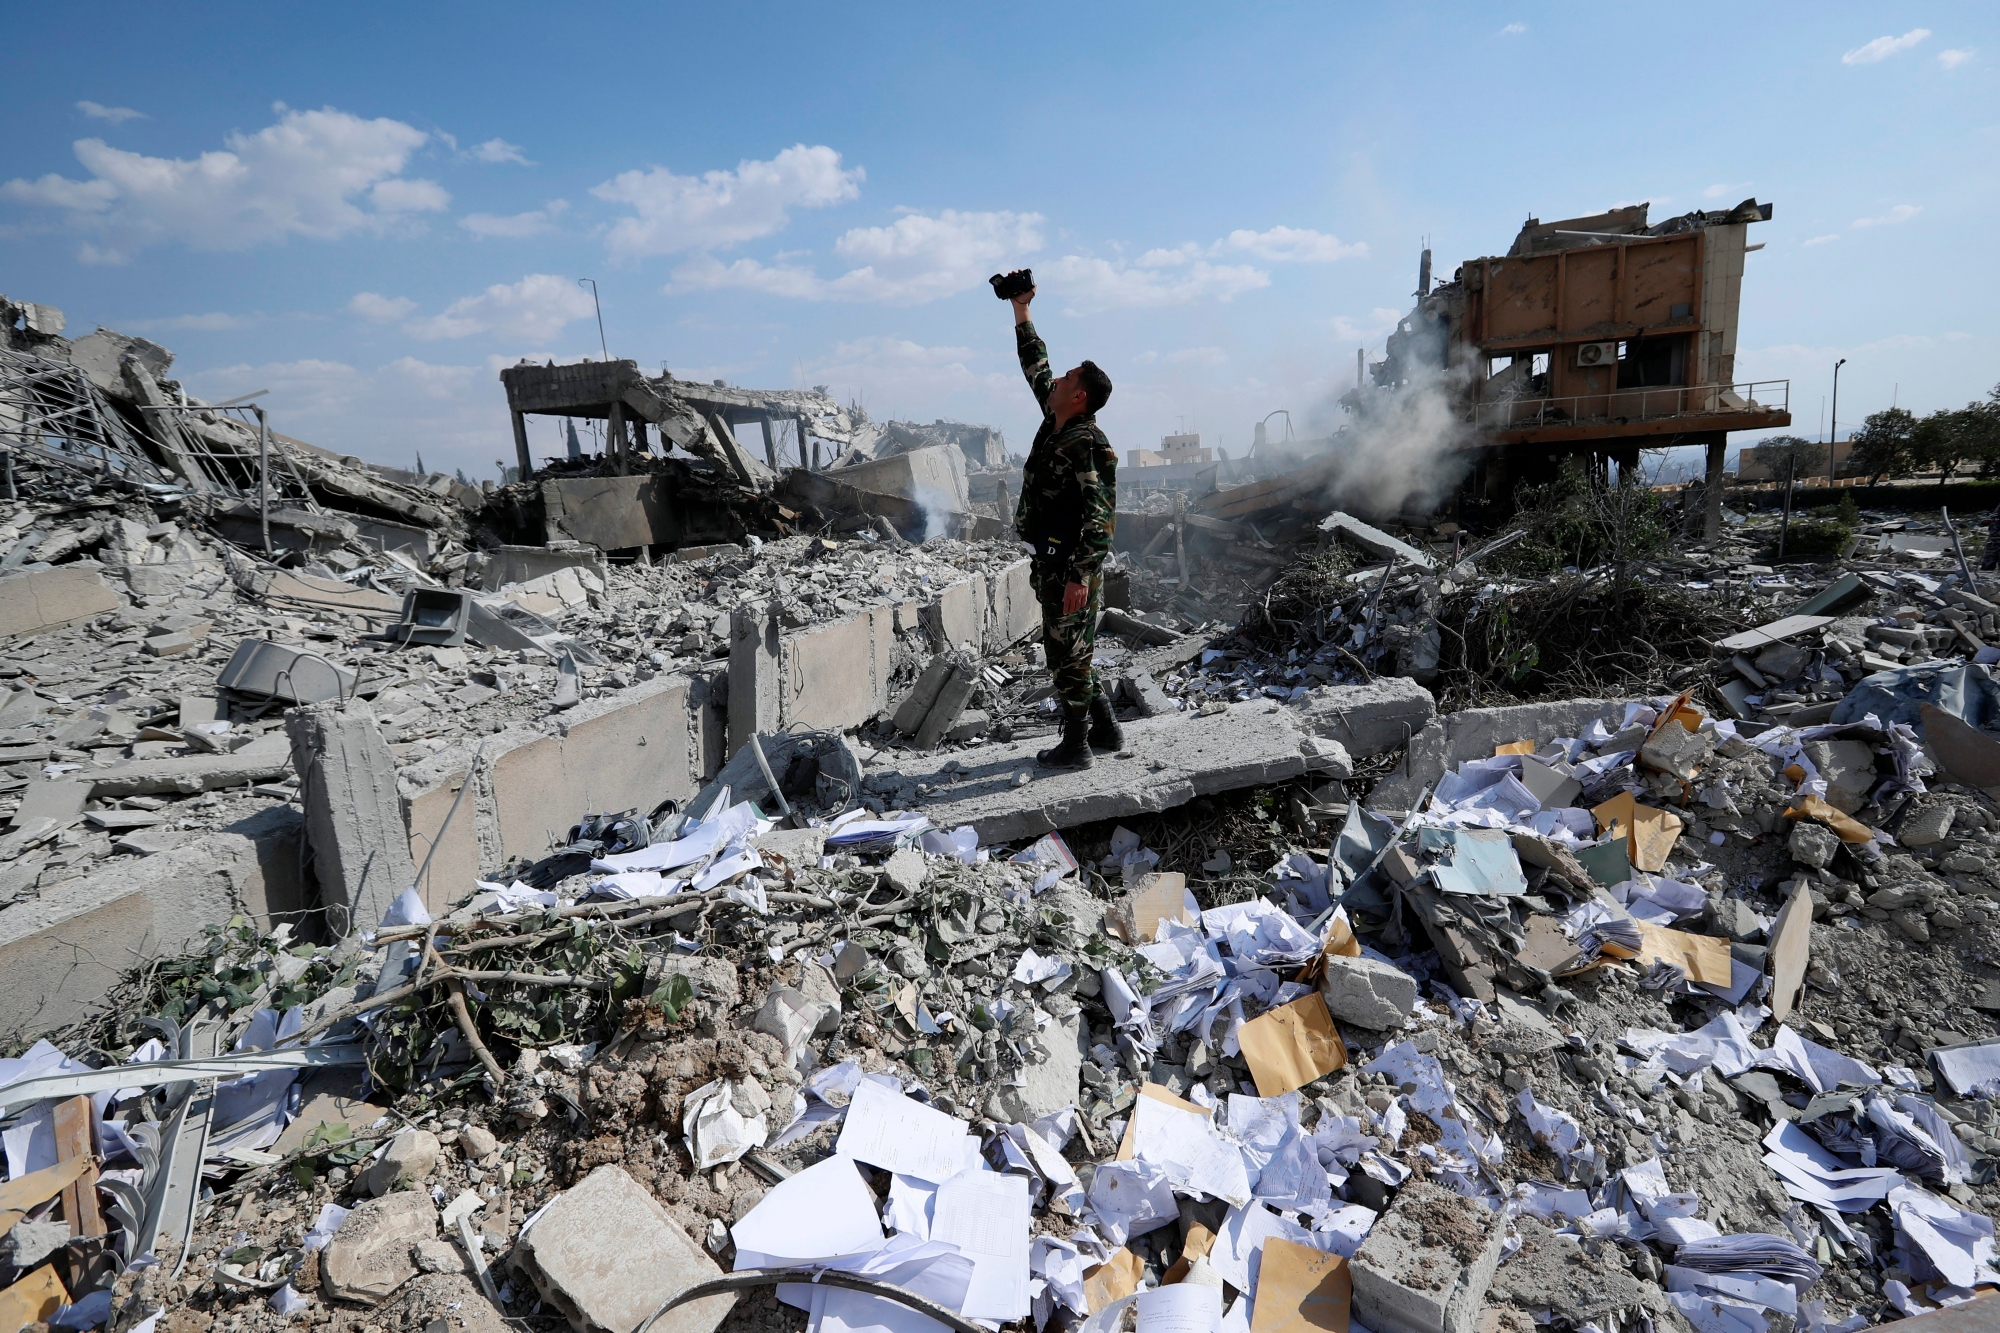 A Syrian soldier films the damage of the Syrian Scientific Research Center which was attacked by U.S., British and French military strikes to punish President Bashar Assad for suspected chemical attack against civilians, in Barzeh, near Damascus, Syria, Saturday, April 14, 2018. The Pentagon says none of the missiles filed by the U.S. and its allies was deflected by Syrian air defenses, rebutting claims by the Russian and Syrian governments. Lt. Gen. Kenneth McKenzie, the director of the Joint Staff at the Pentagon, also says there also is no indication that Russian air defense systems were employed early Saturday in Syria. (AP Photo/Hassan Ammar) APTOPIX Syria